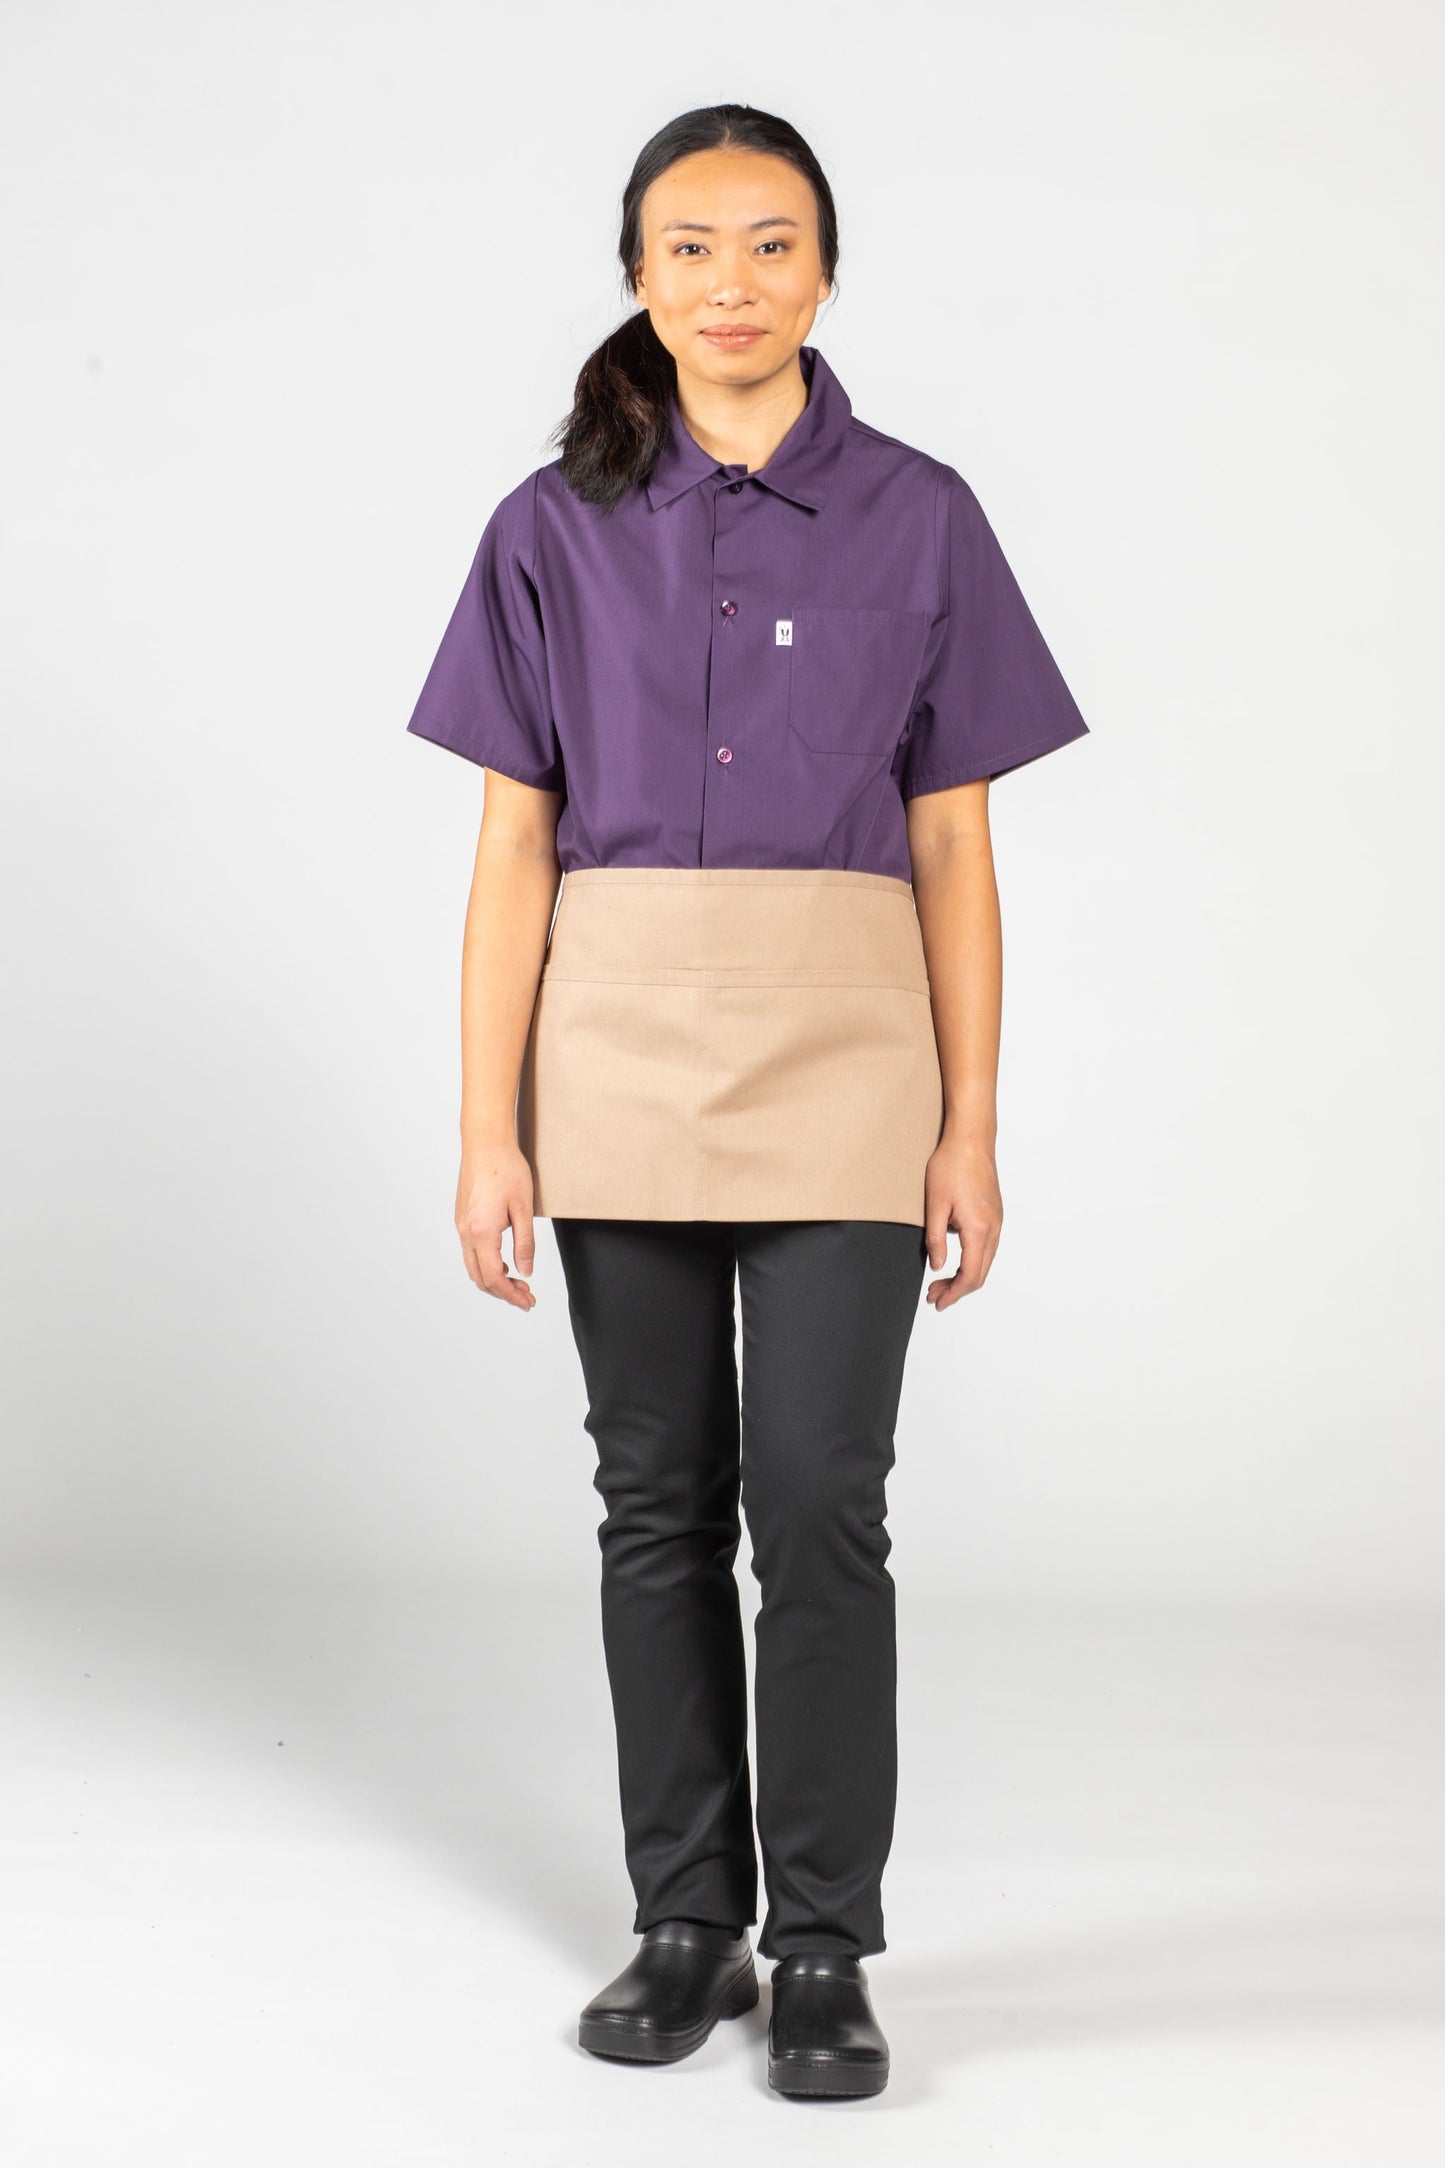 Two-Section Pocket Waist Apron #3065